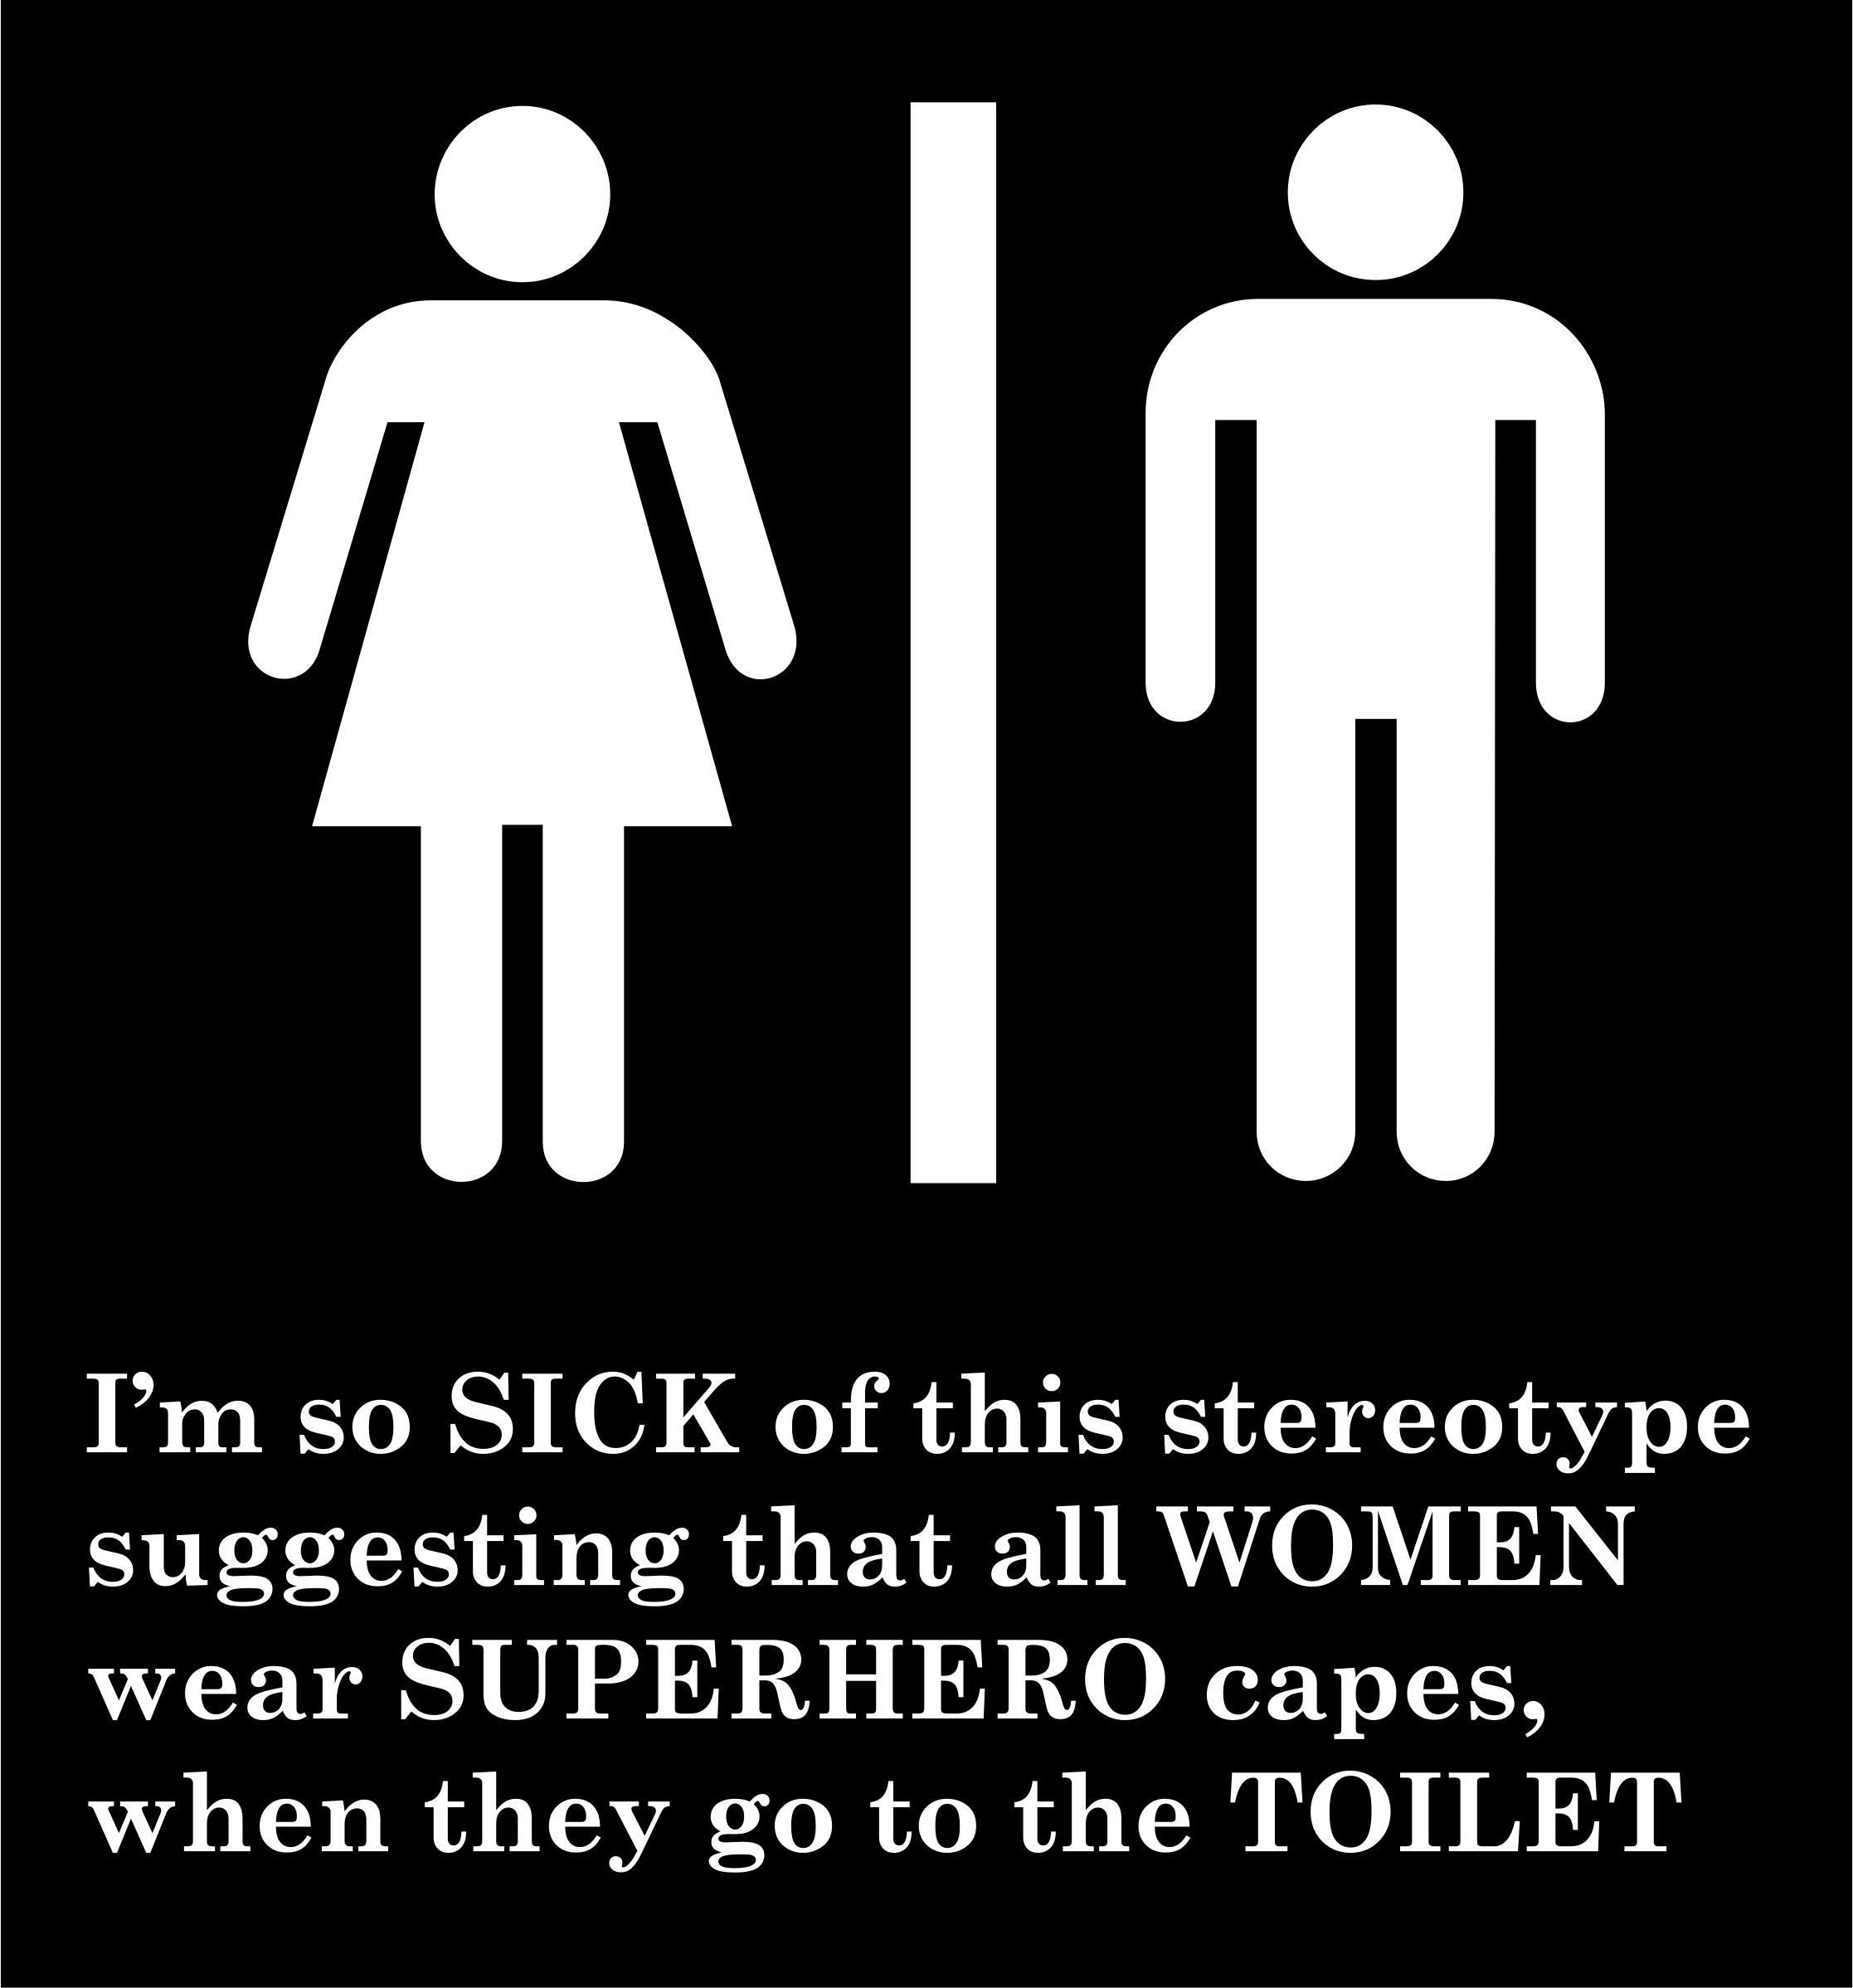 Bathroom Sign Stereotype, by GDJ png